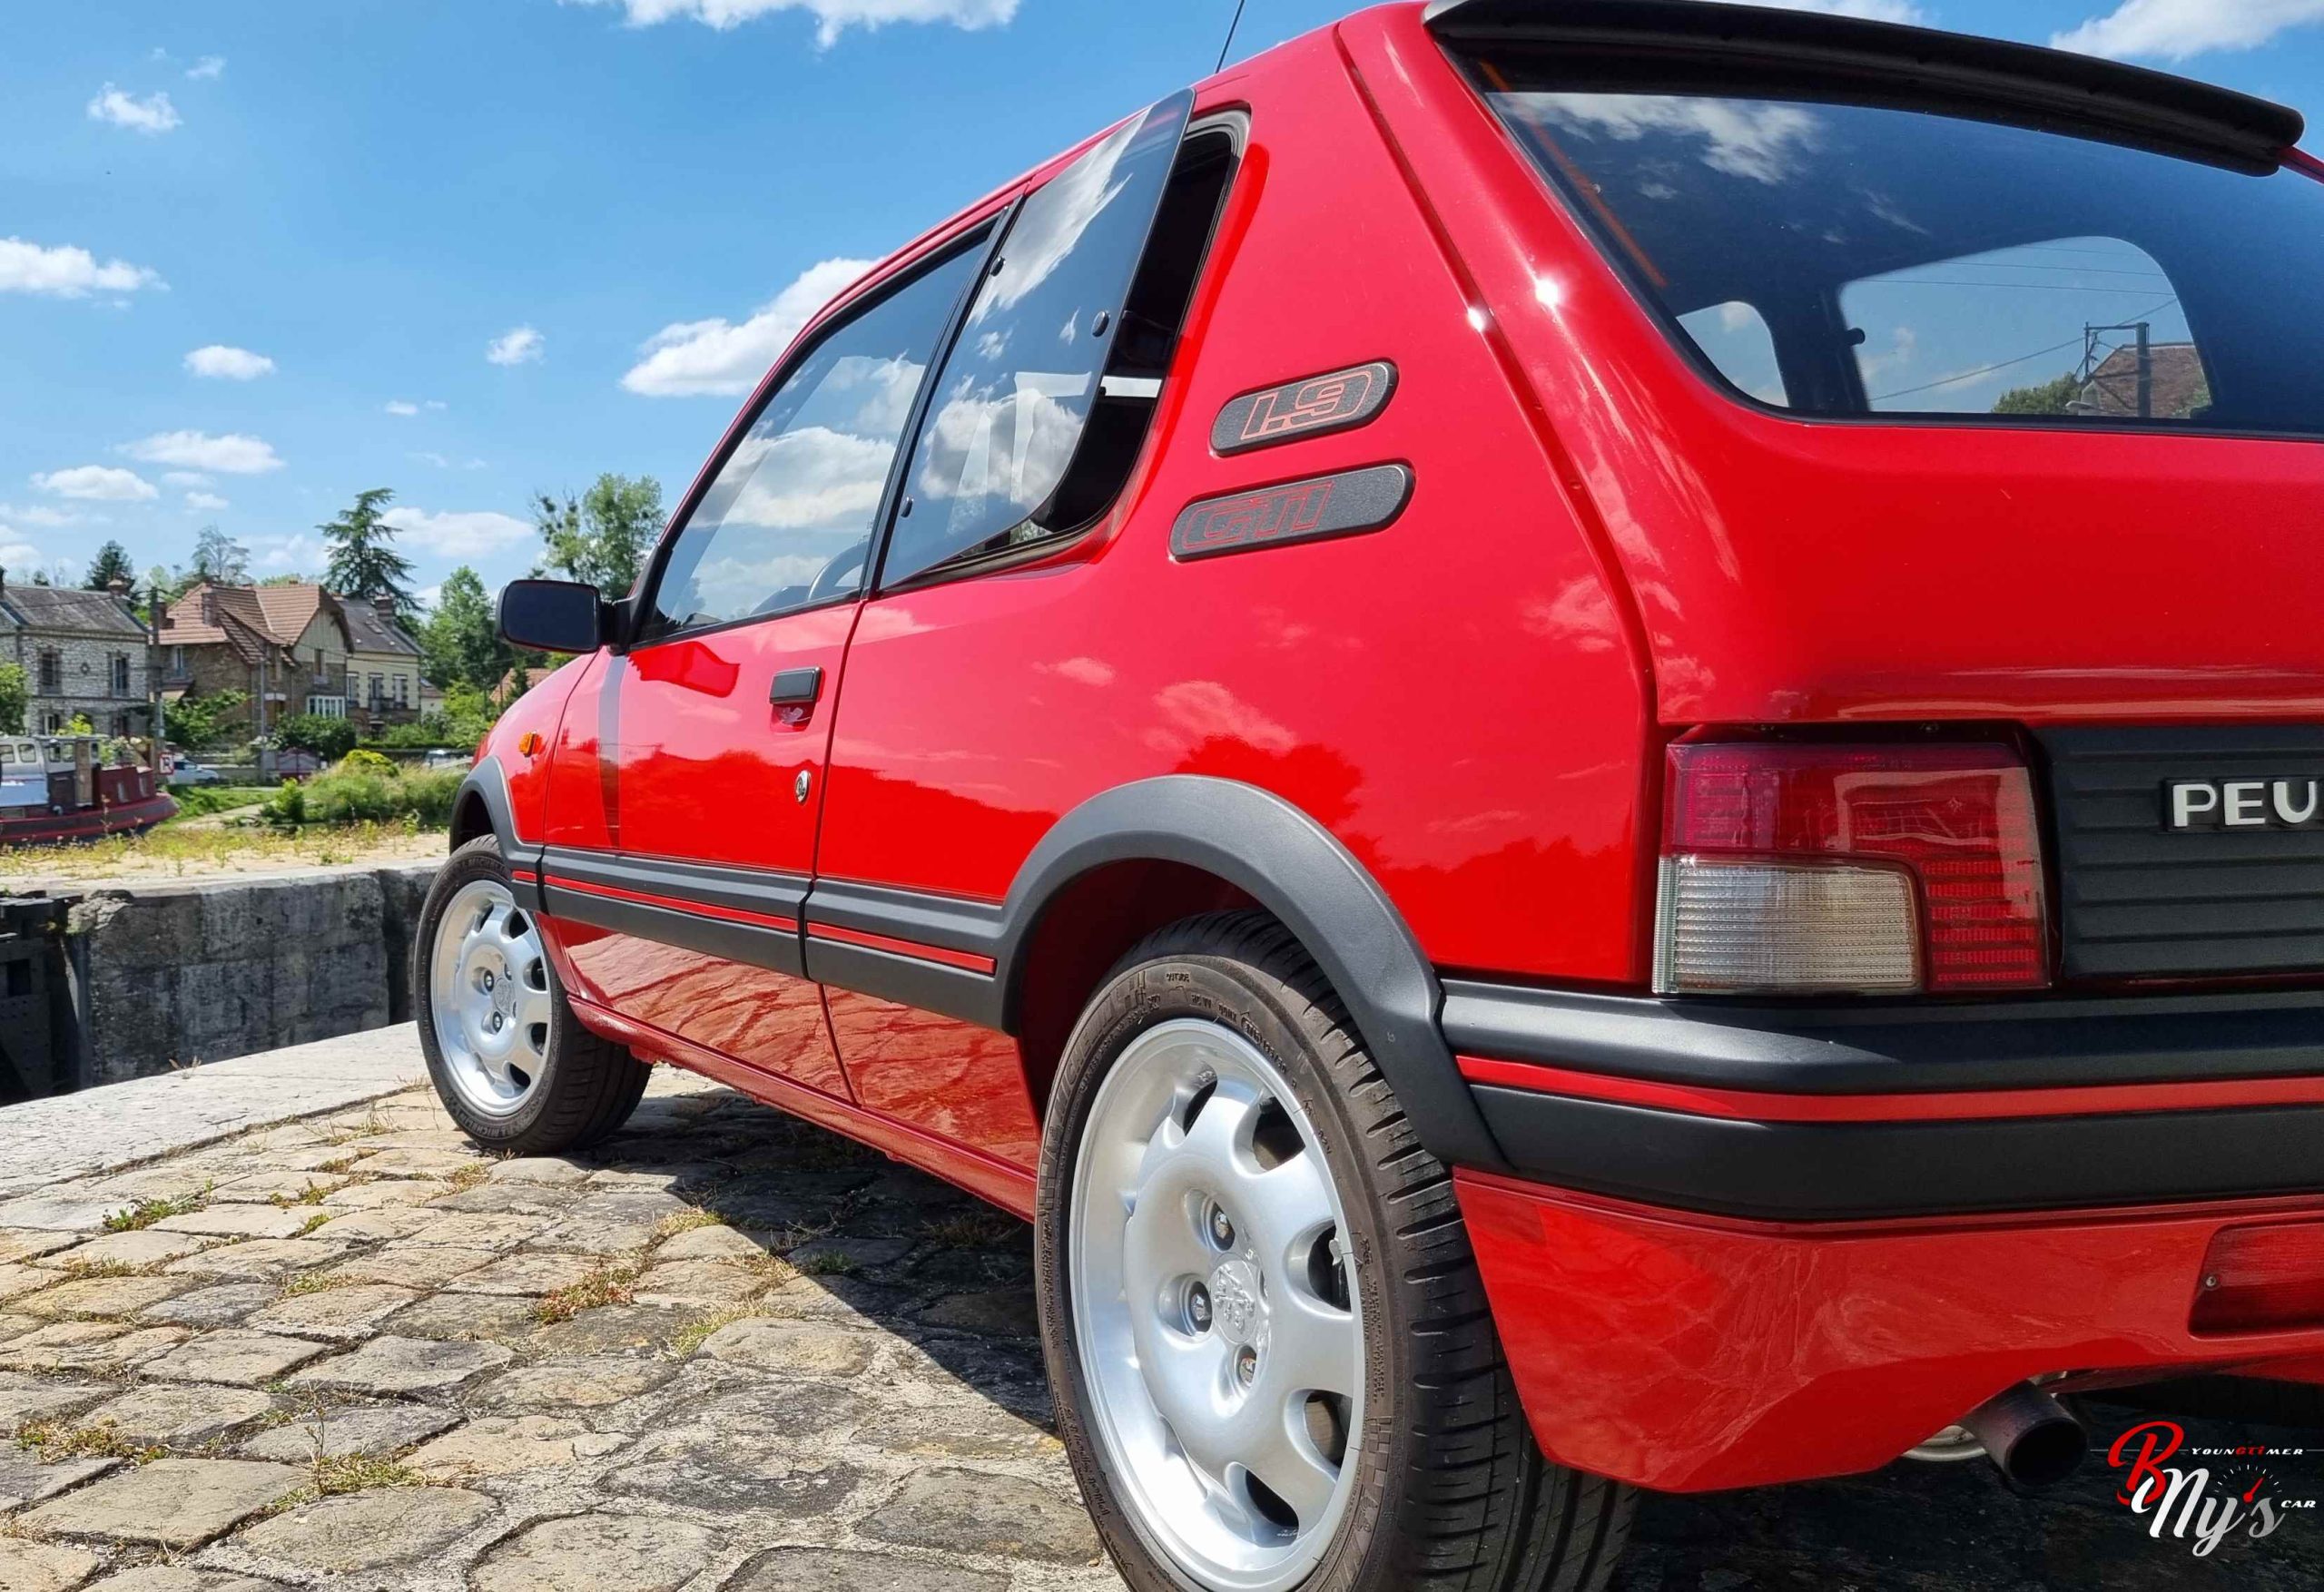 PEUGEOT 205 GTI 1.9 130CH PHASE 2 - BNYS CAR